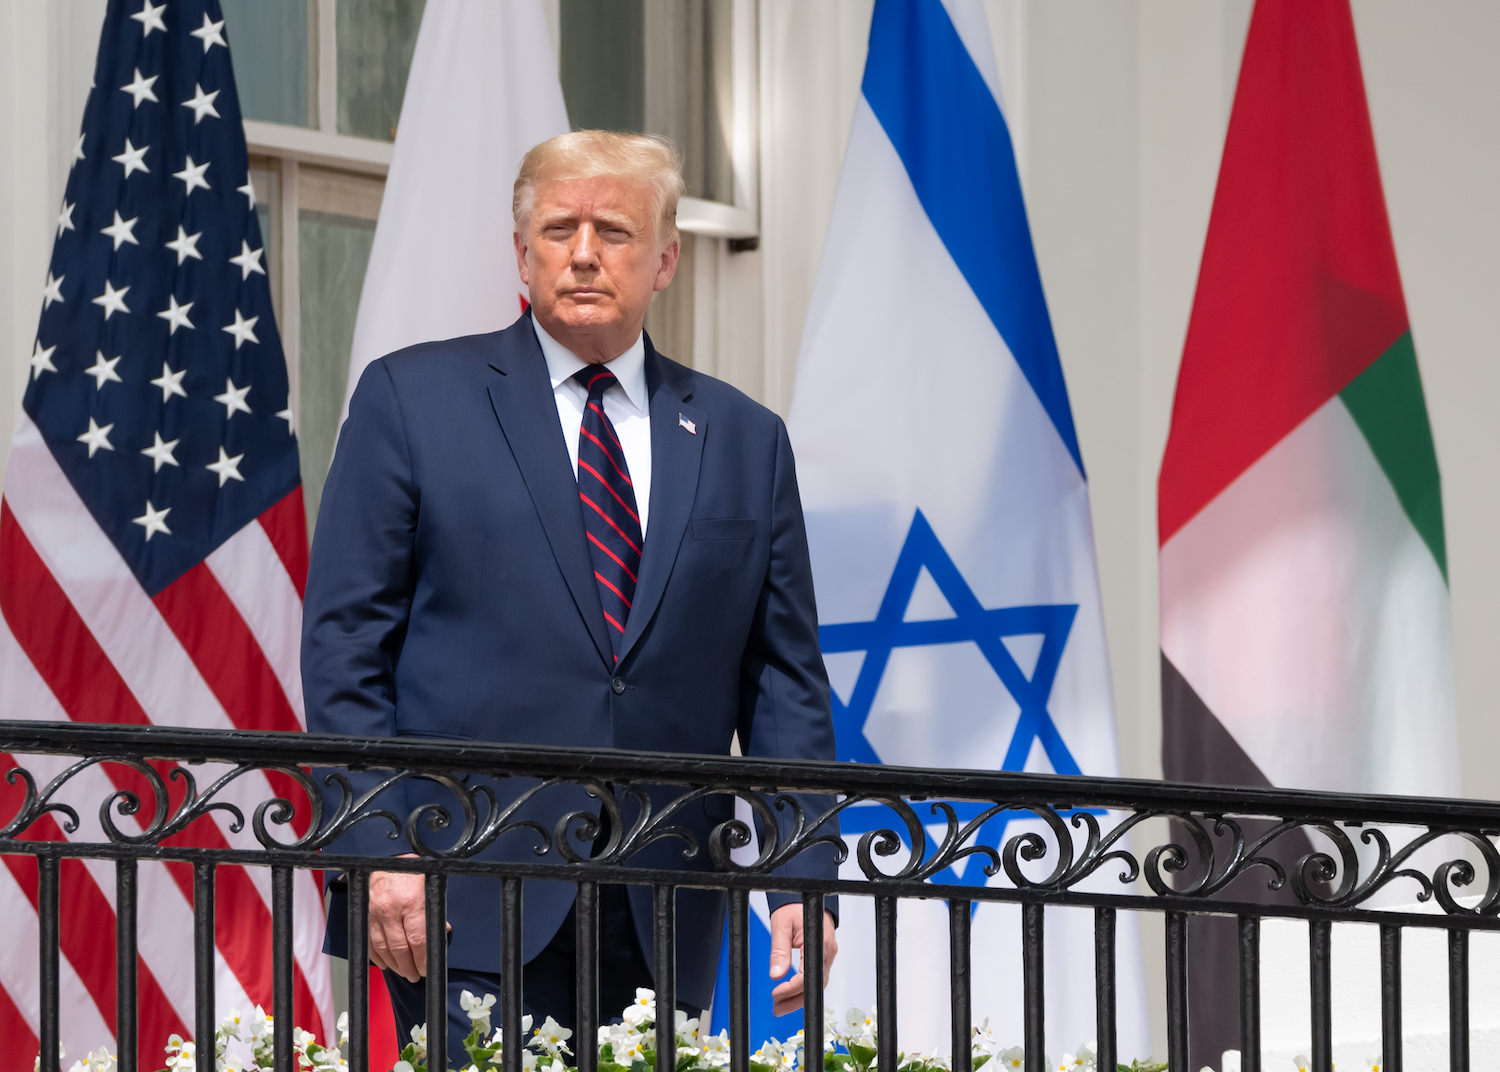 Donald Trump standing with the Israeli flag